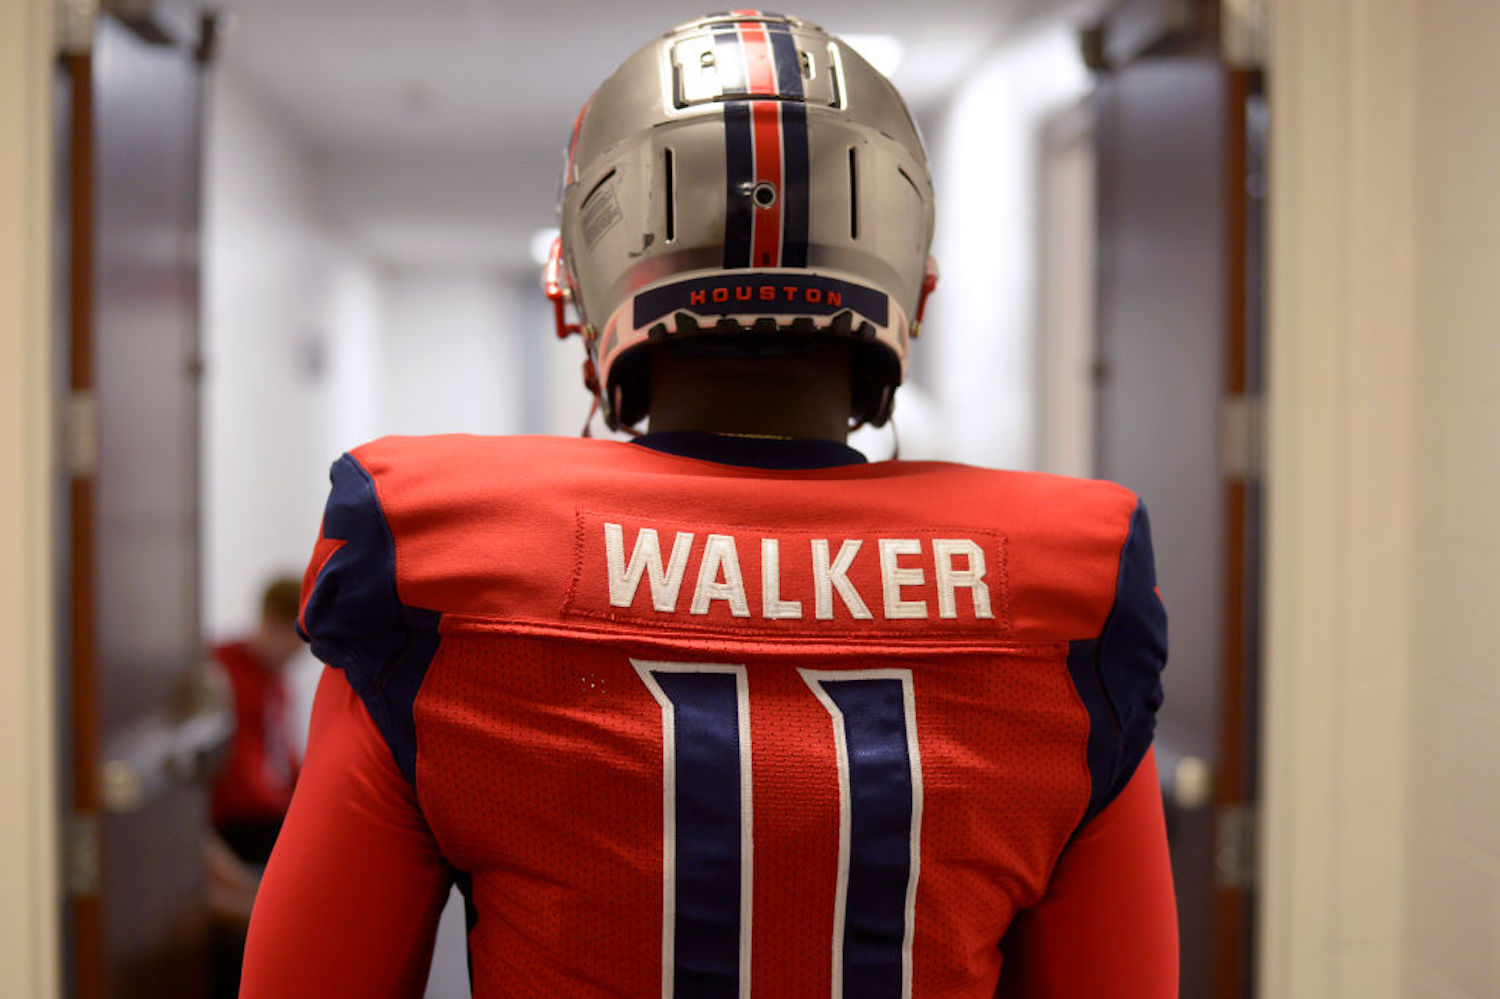 With Teddy Bridgewater inactive for Week 11, PJ Walker will get the start for the Carolina Panthers. So, who is Walker and how will he fare in his first NFL start?